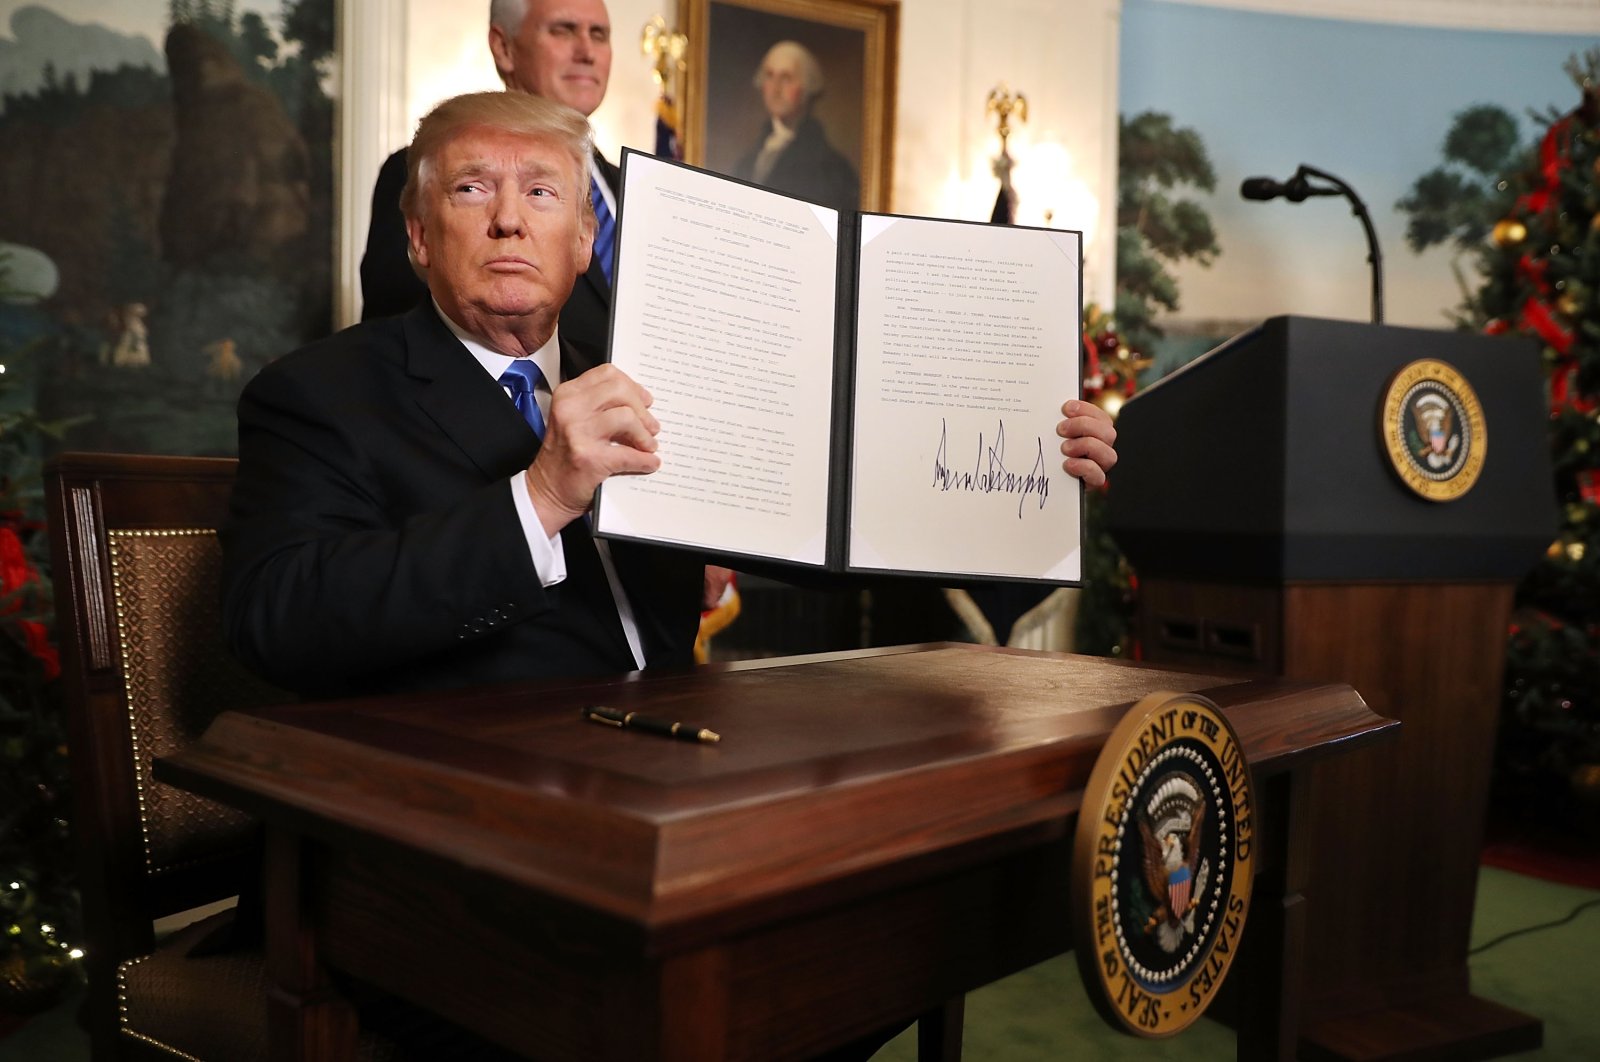 Then-U.S. President Donald Trump holds up a proclamation that recognizes Jerusalem as the capital of Israel, at the White House, Washington, D.C., Dec. 6, 2017. (Photo by Getty Images)